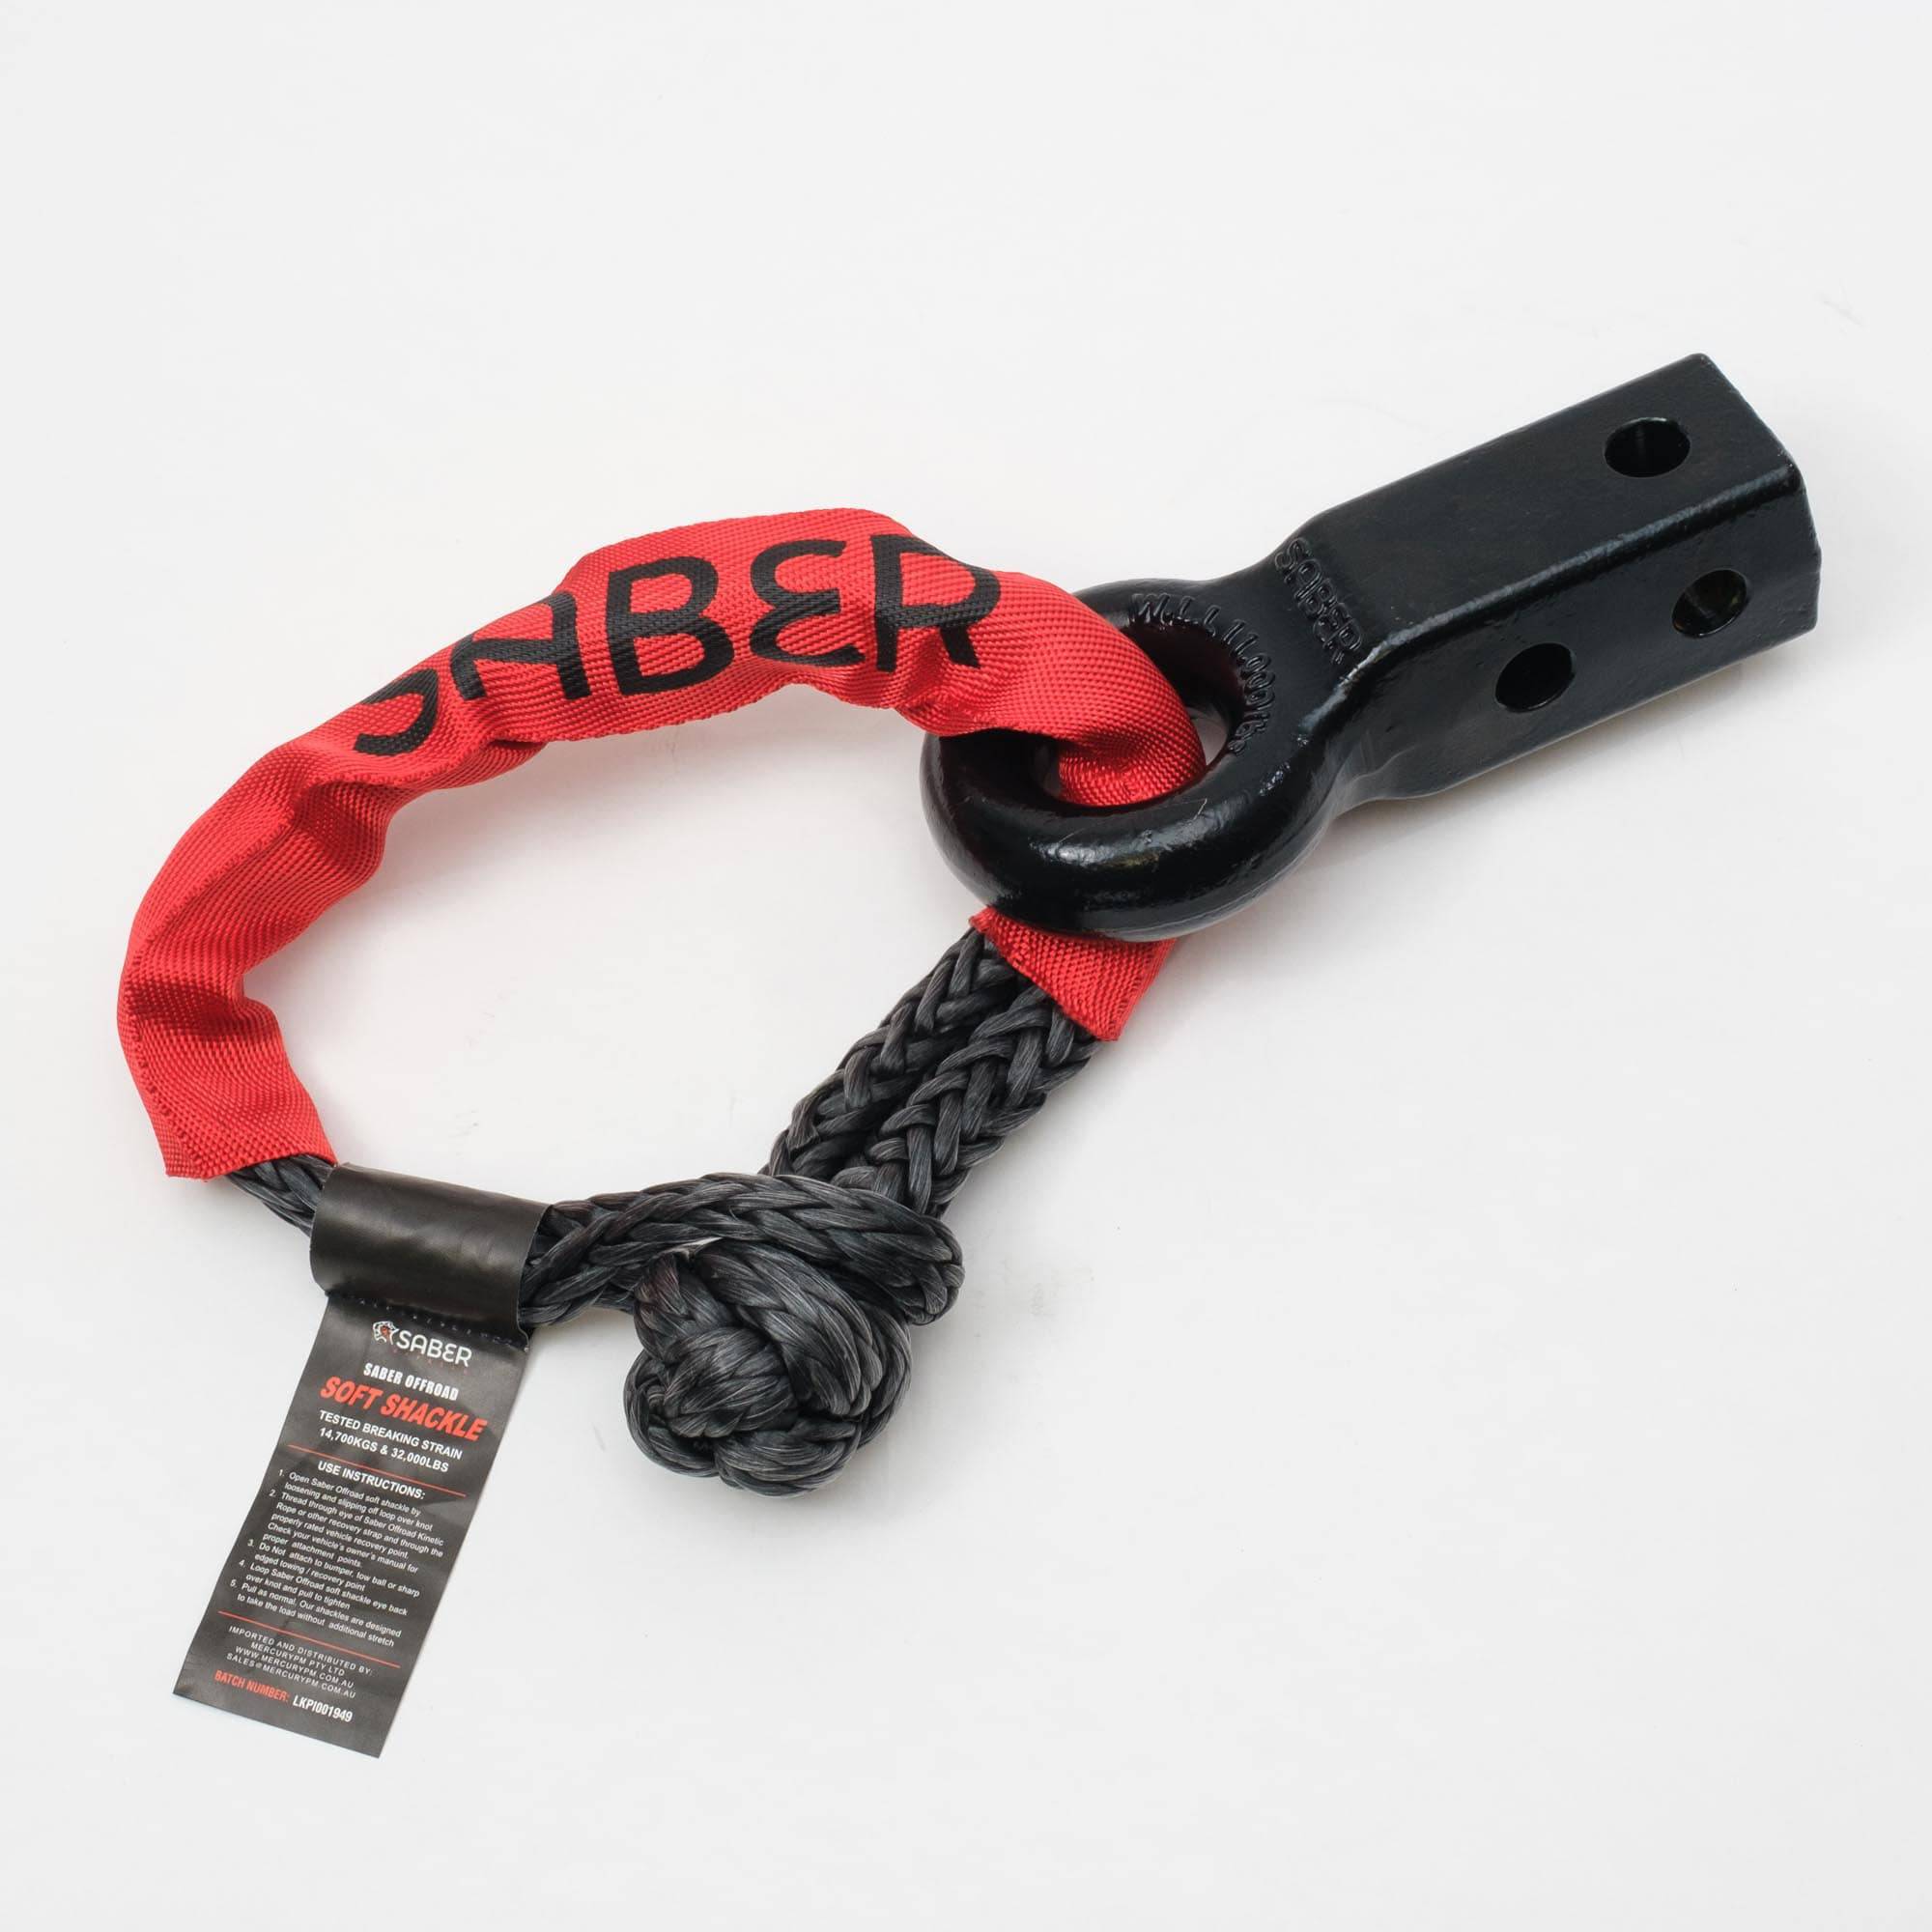 Saber Offroad Rope Friendly Recovery Hitch – Steel & Sheath Shackle | Saber Offroad